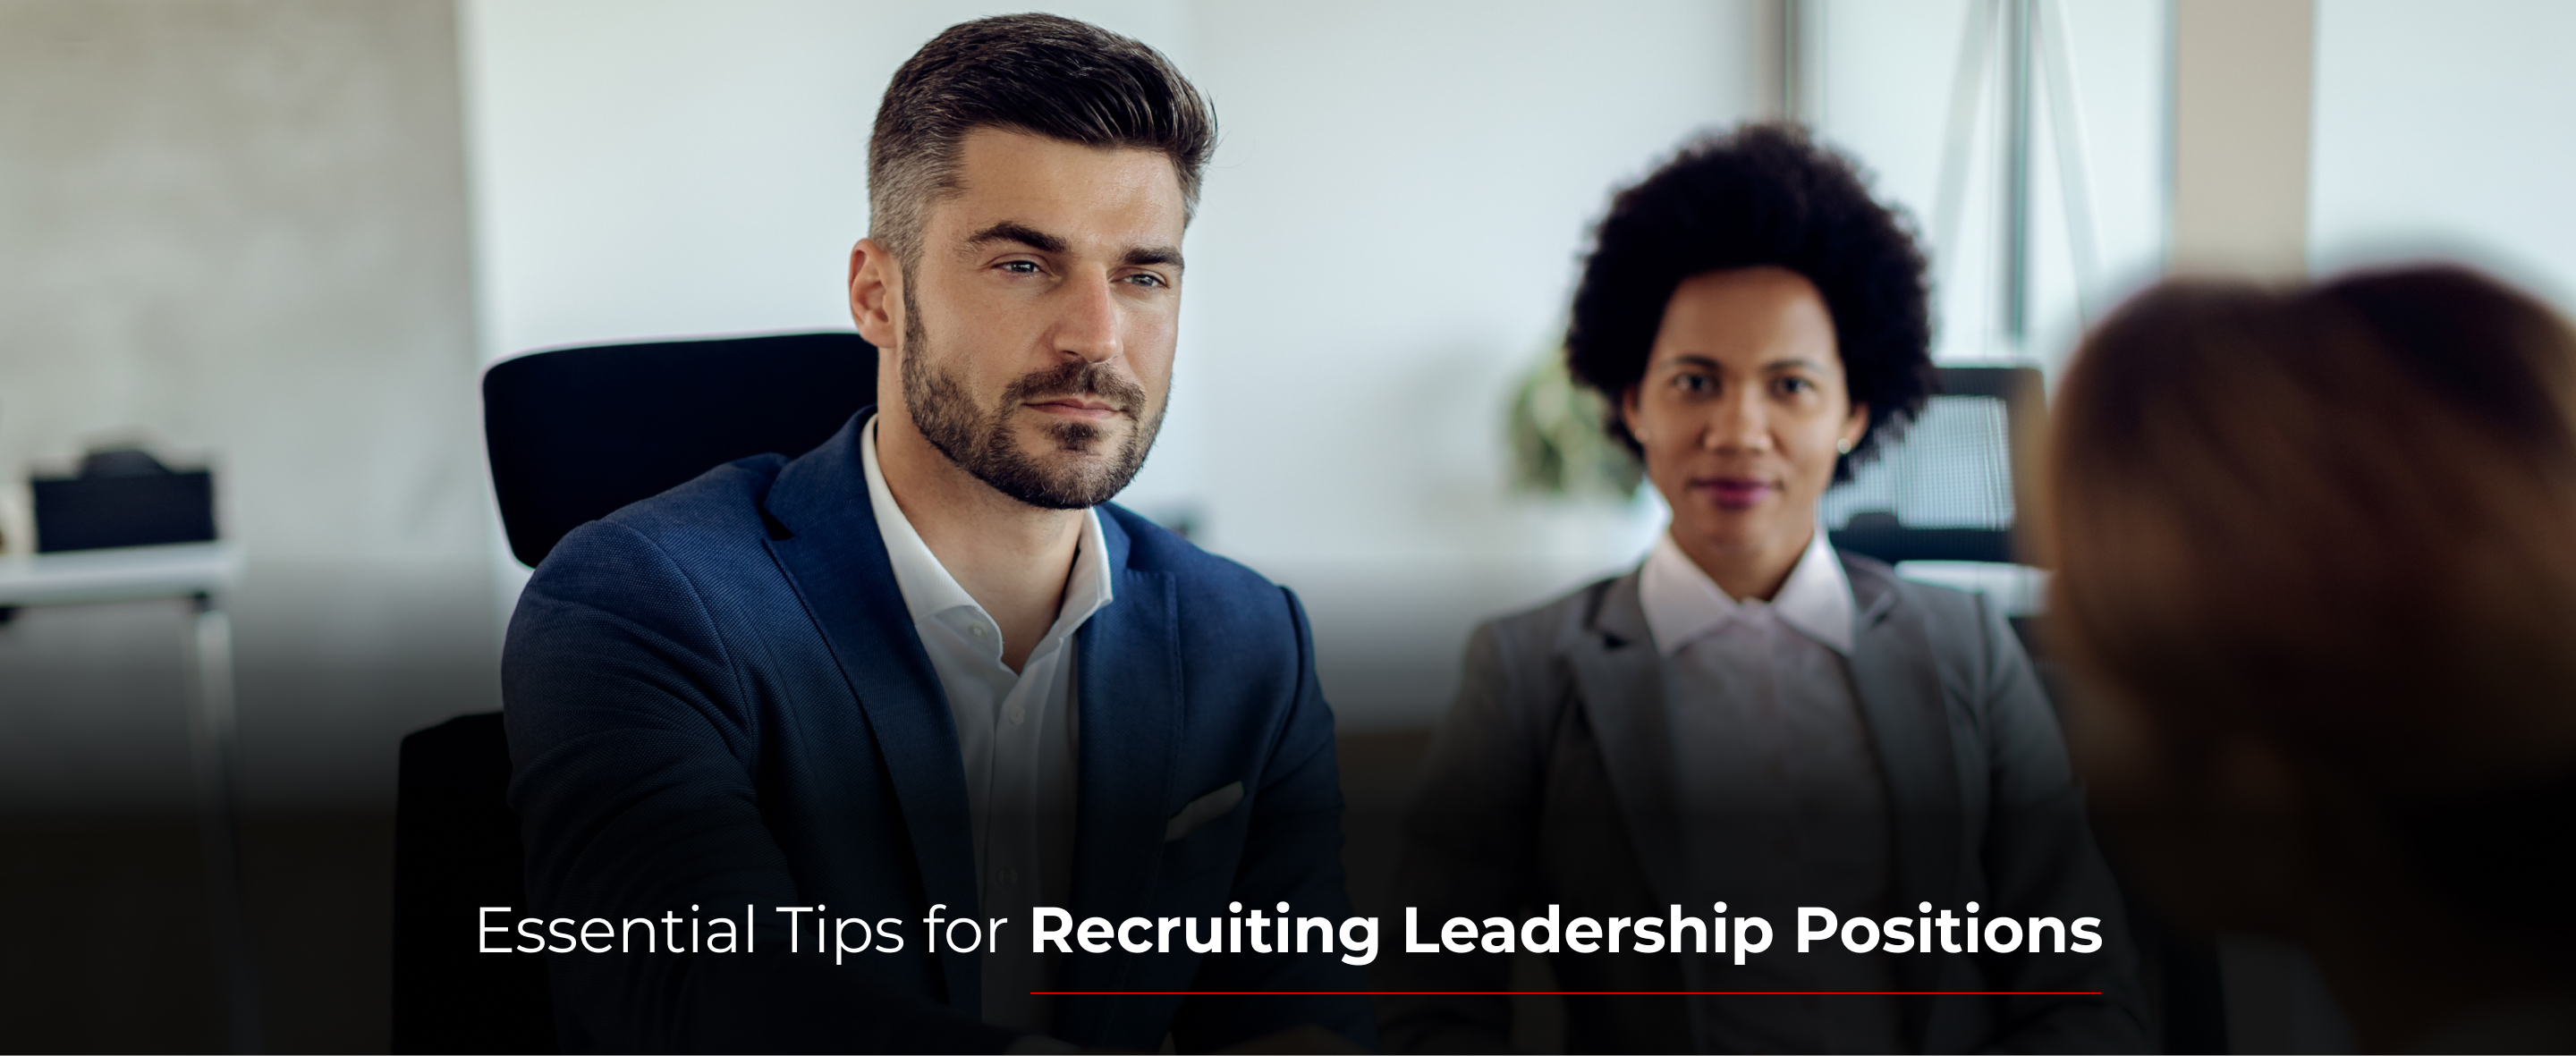 Essential Tips for Recruiting Leadership Positions